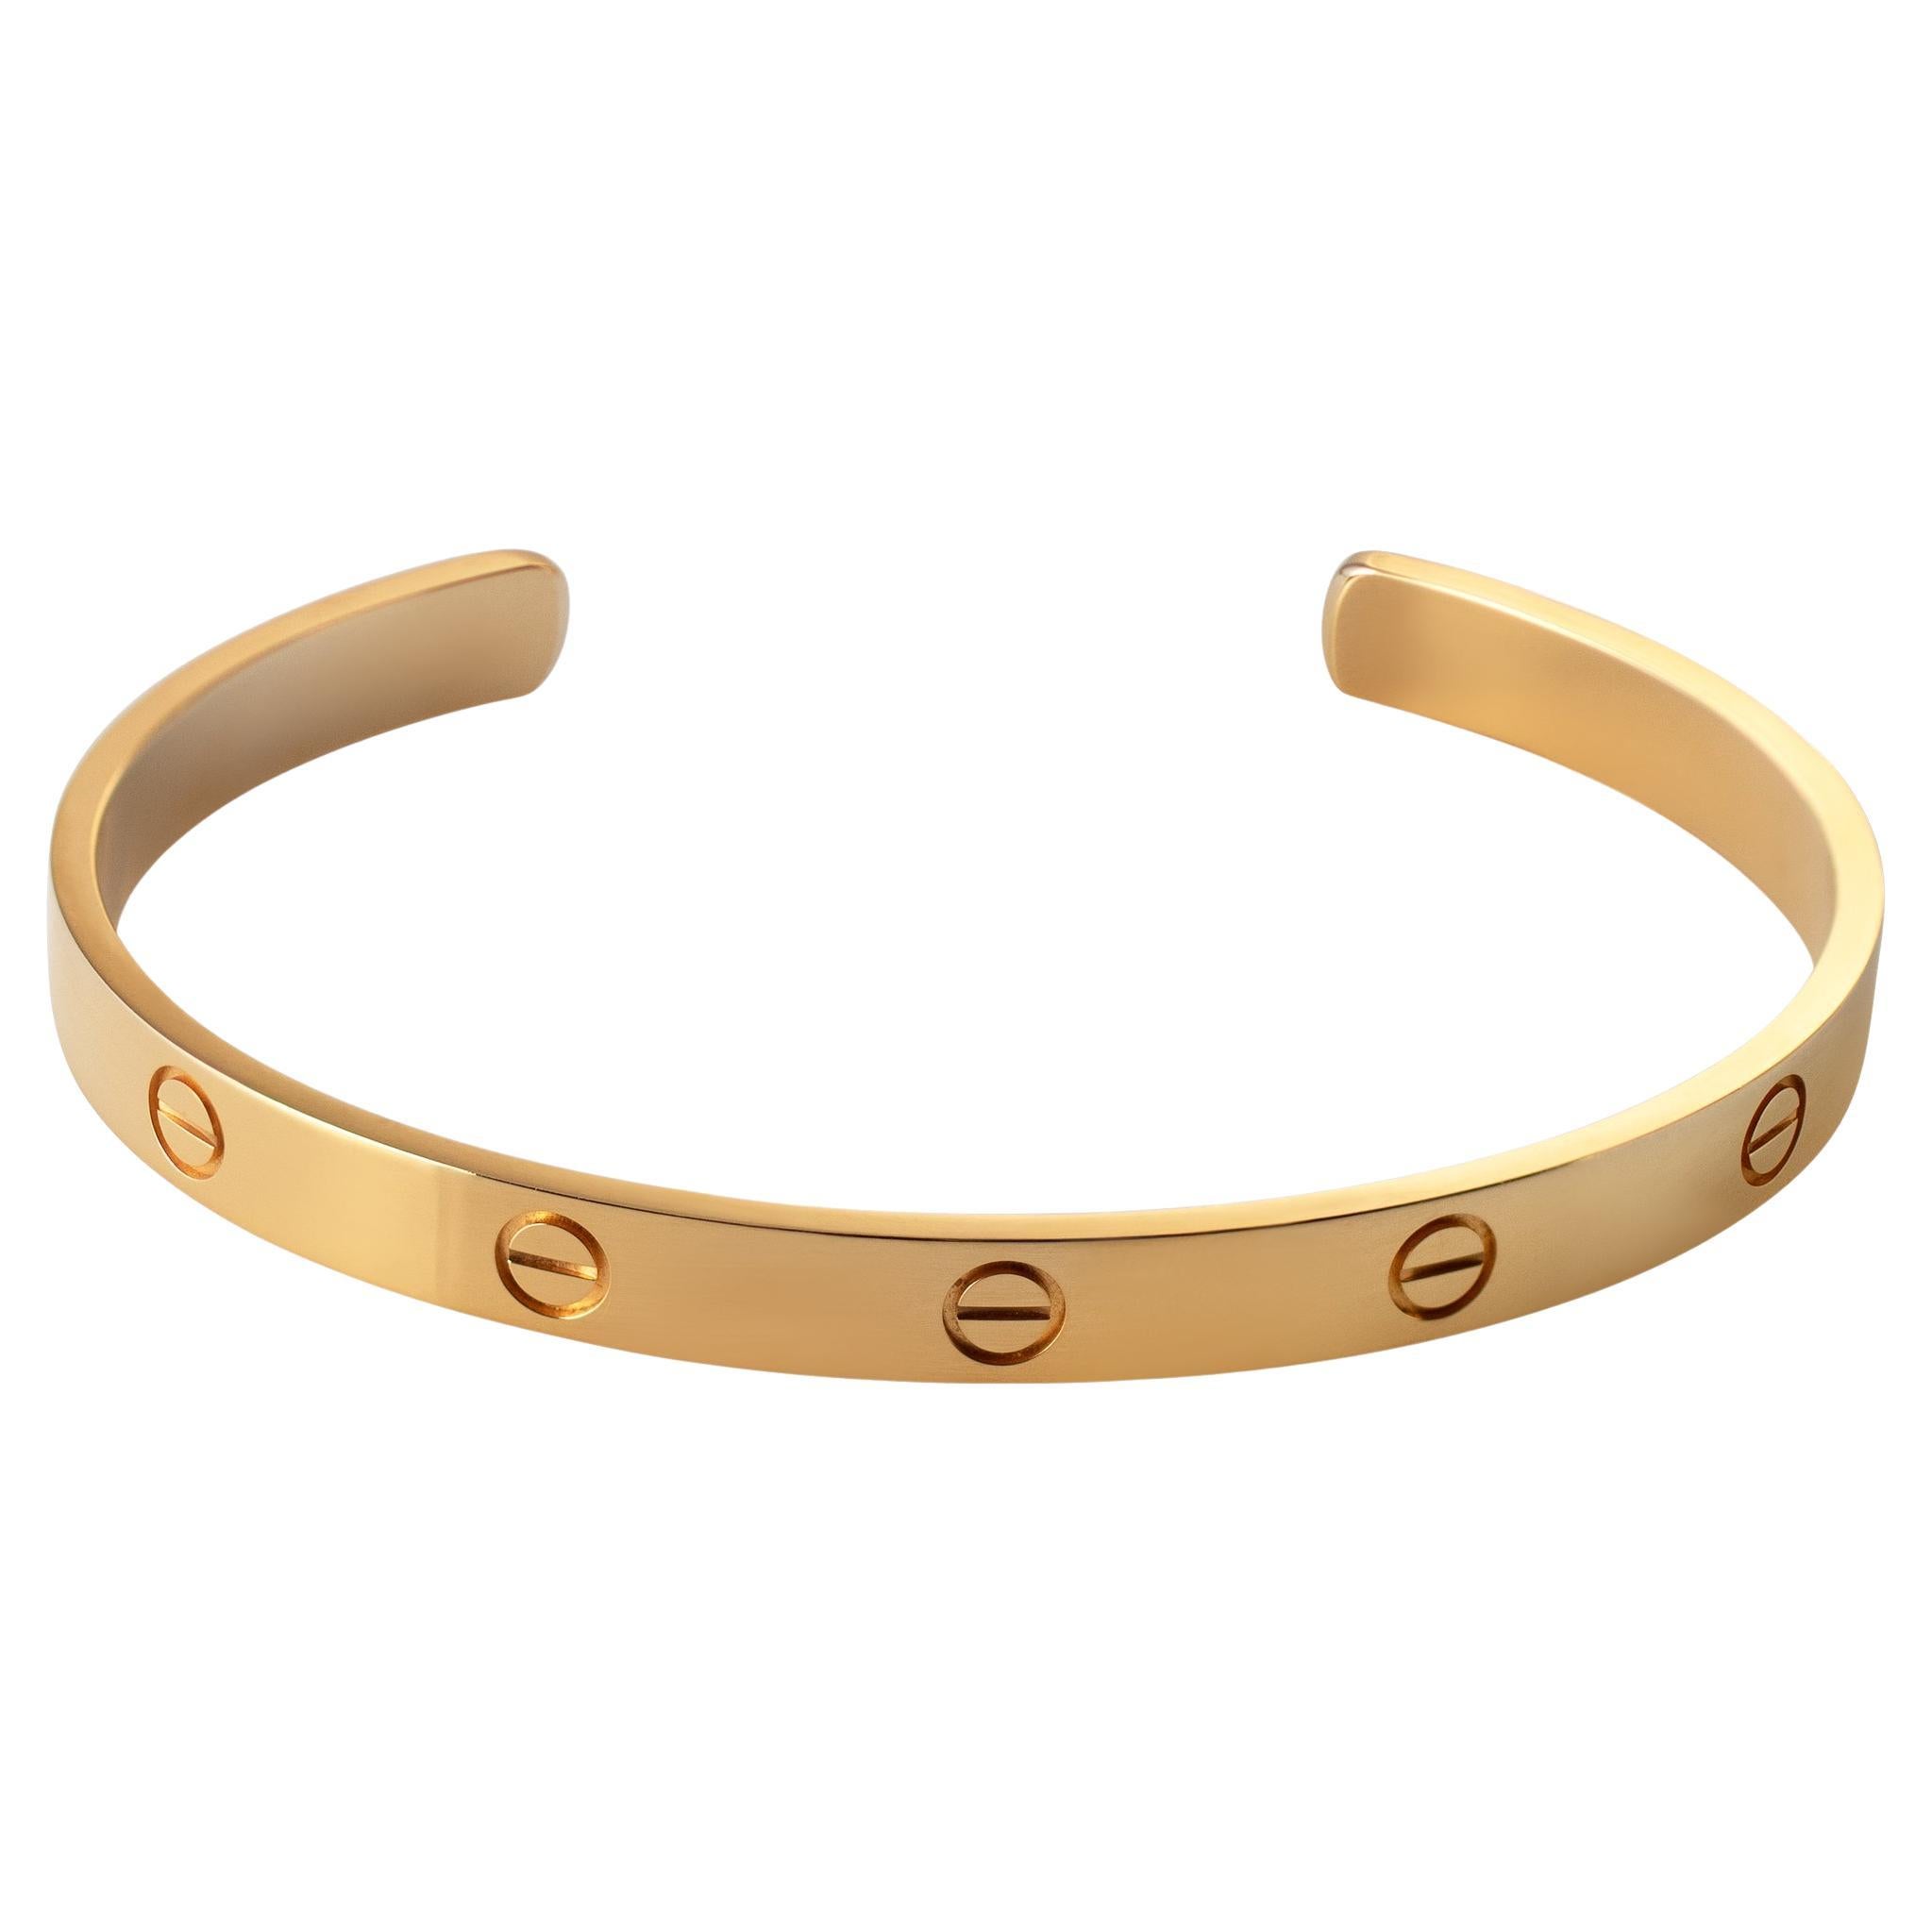 Cartier Love Cuff in 18k Yellow Gold